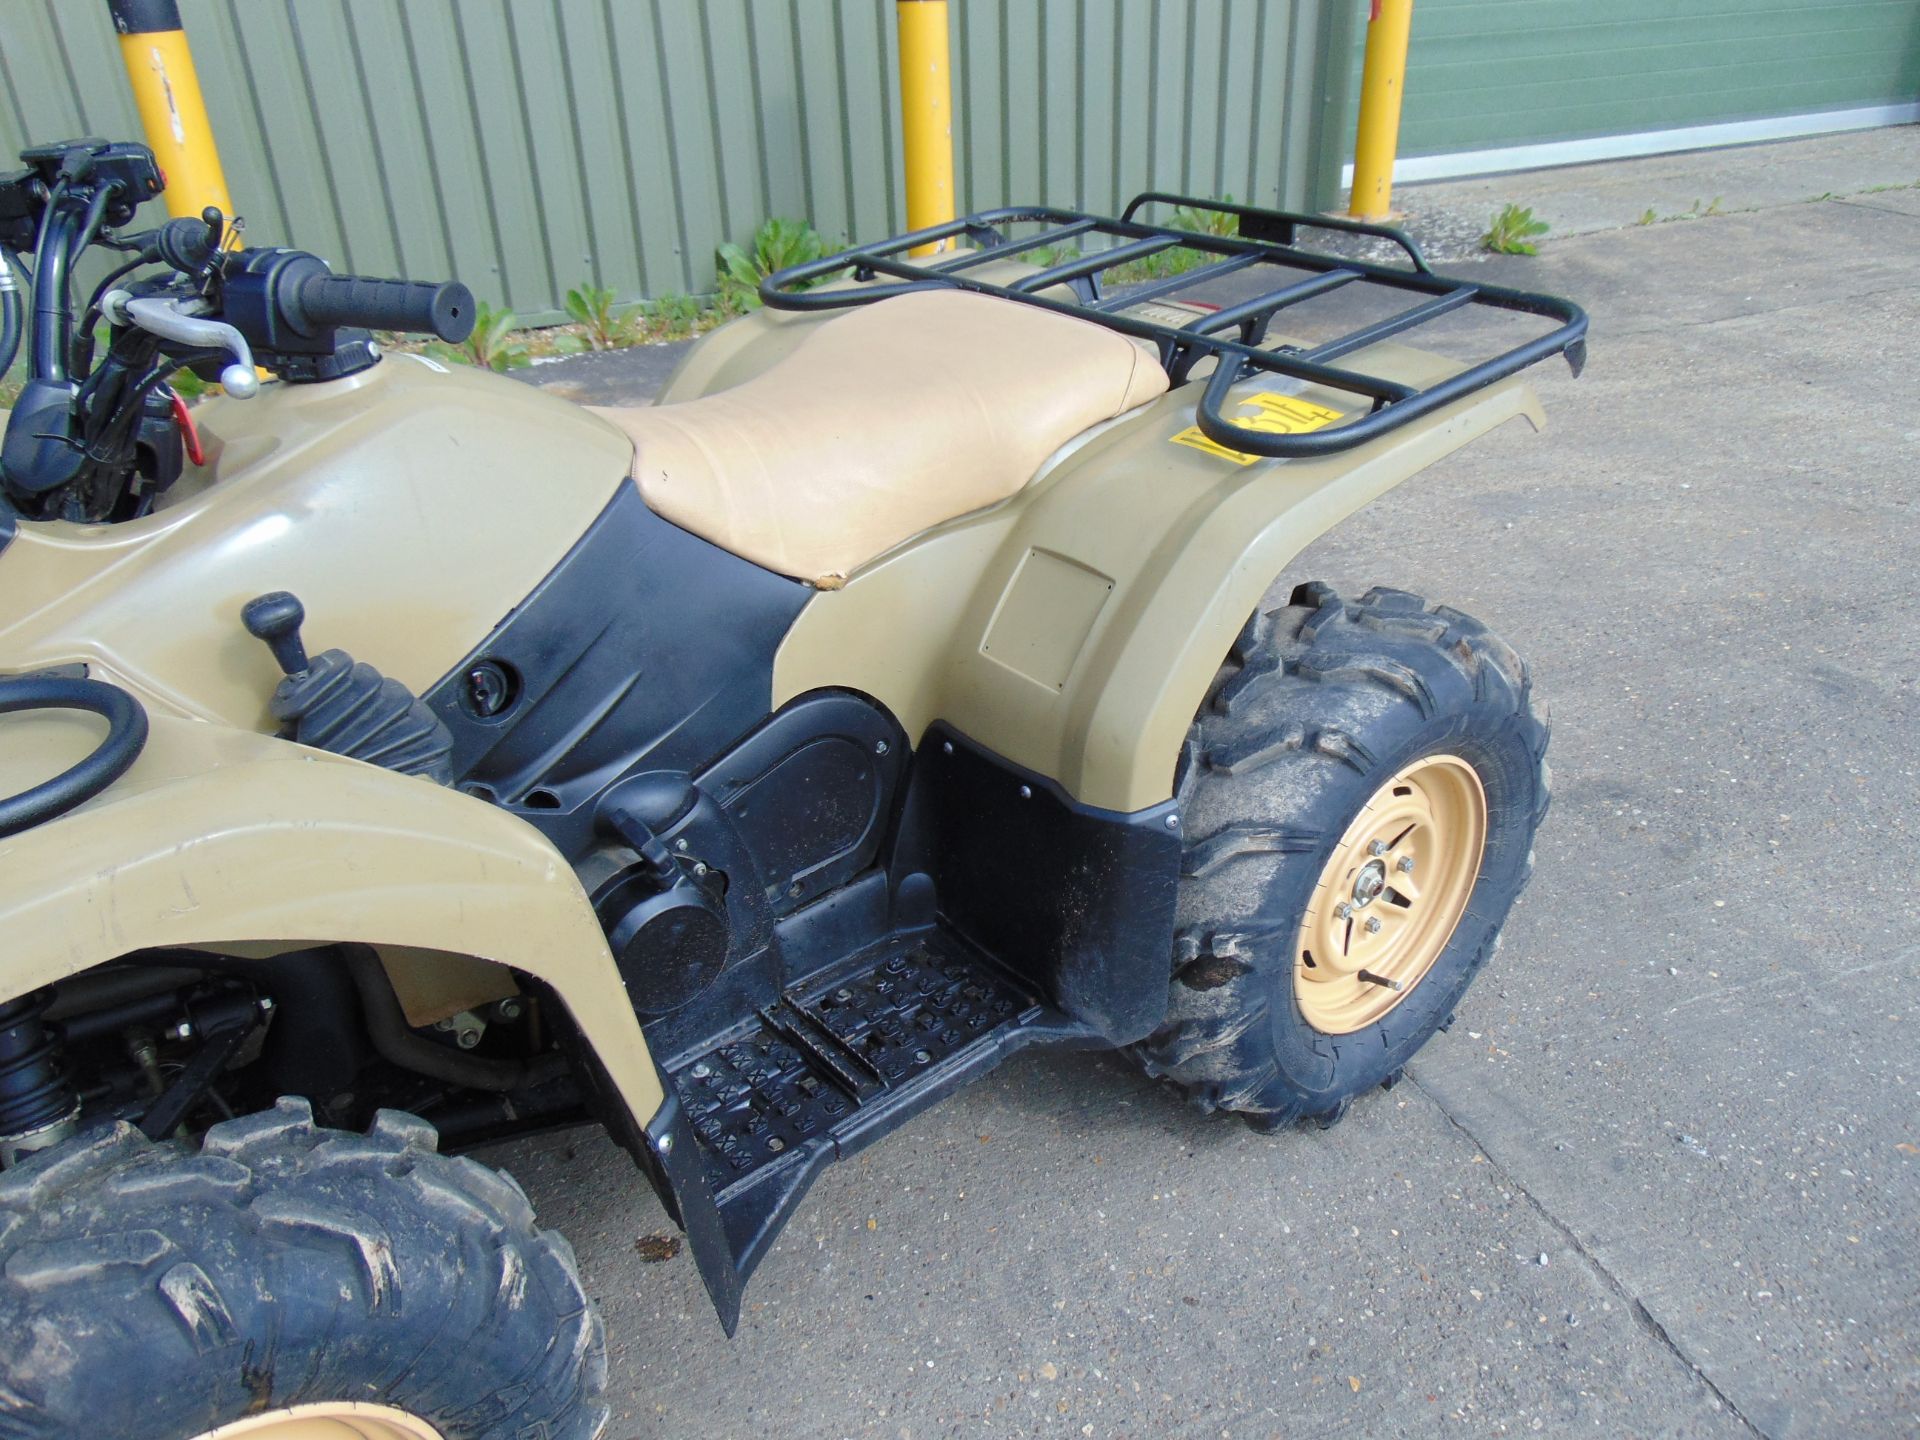 Yamaha Grizzly 450 4 x 4 ATV Quad Bike 584 hours only from MOD - Image 29 of 30